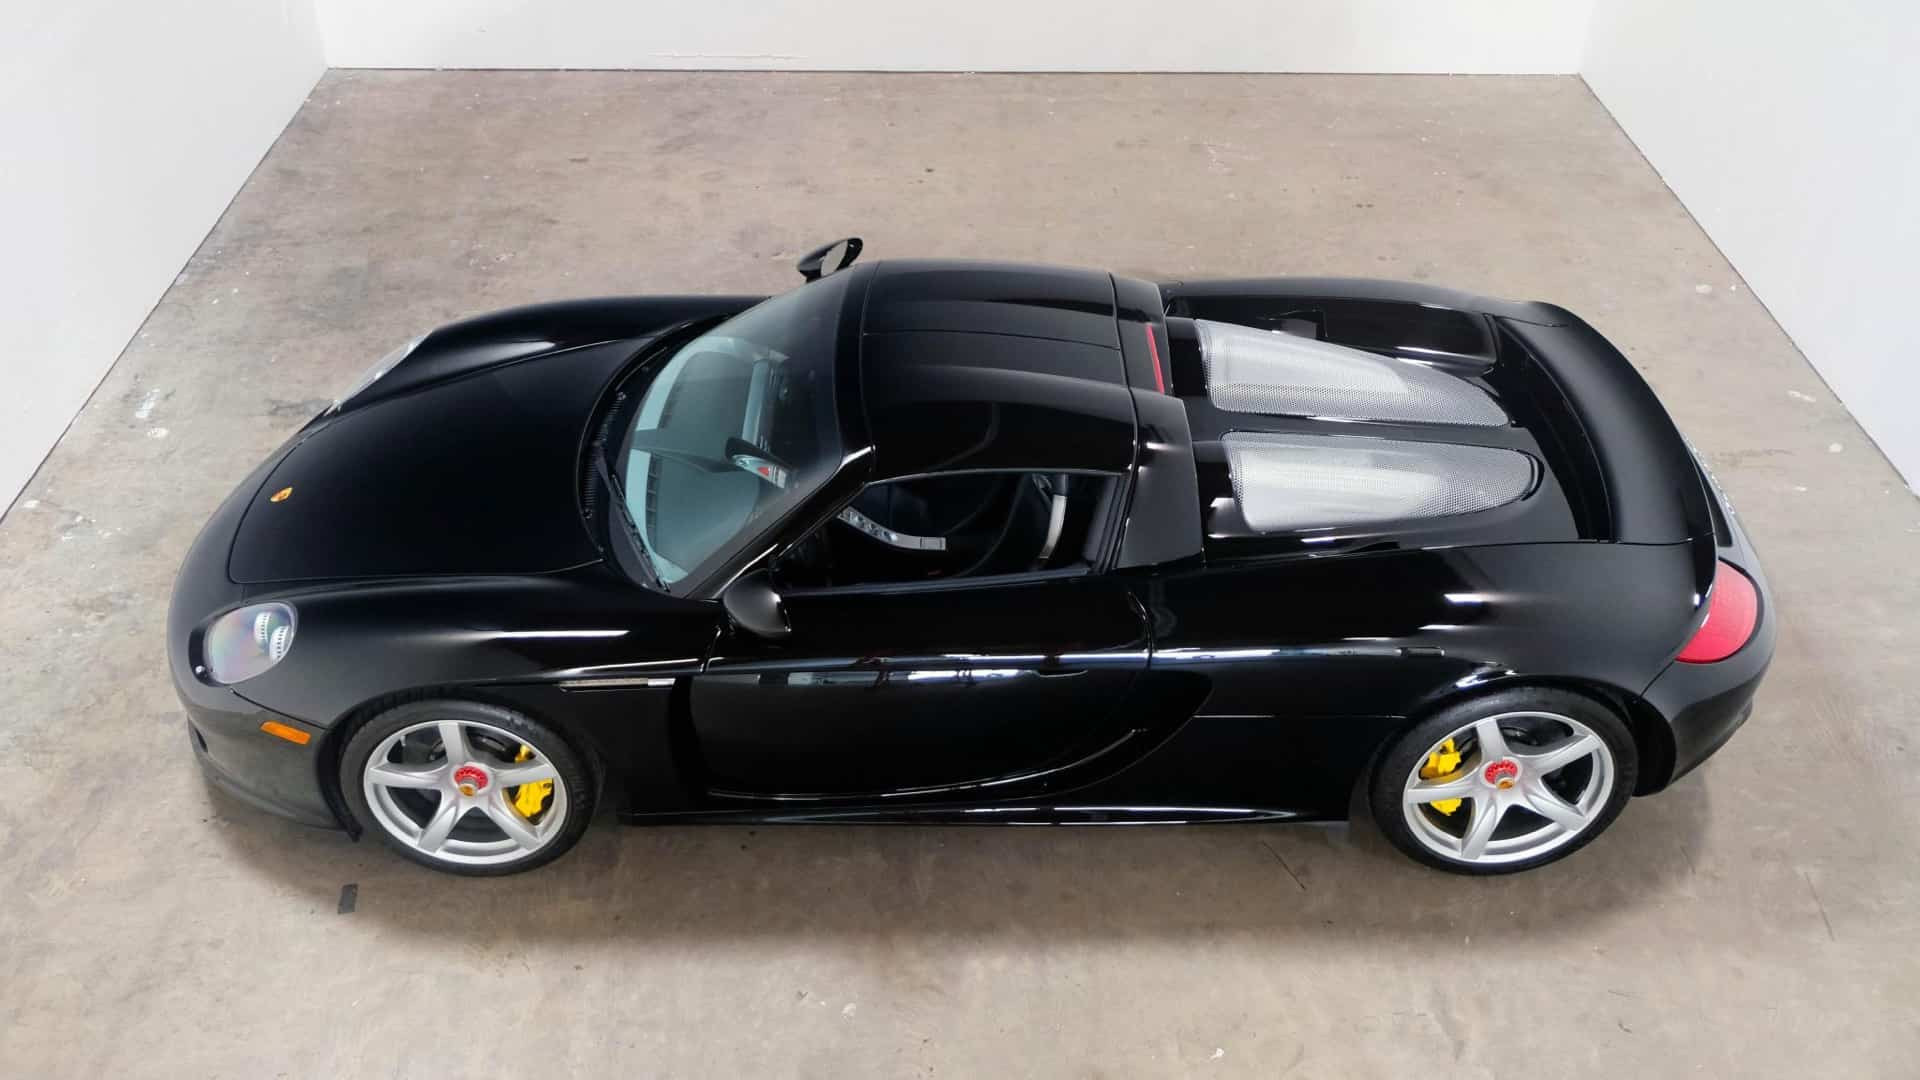 2004-porsche-carrera-gt-once-owned-by-jerry-seinfeld-photo-via-bring-a-trailer_100830922_h-min.jpg